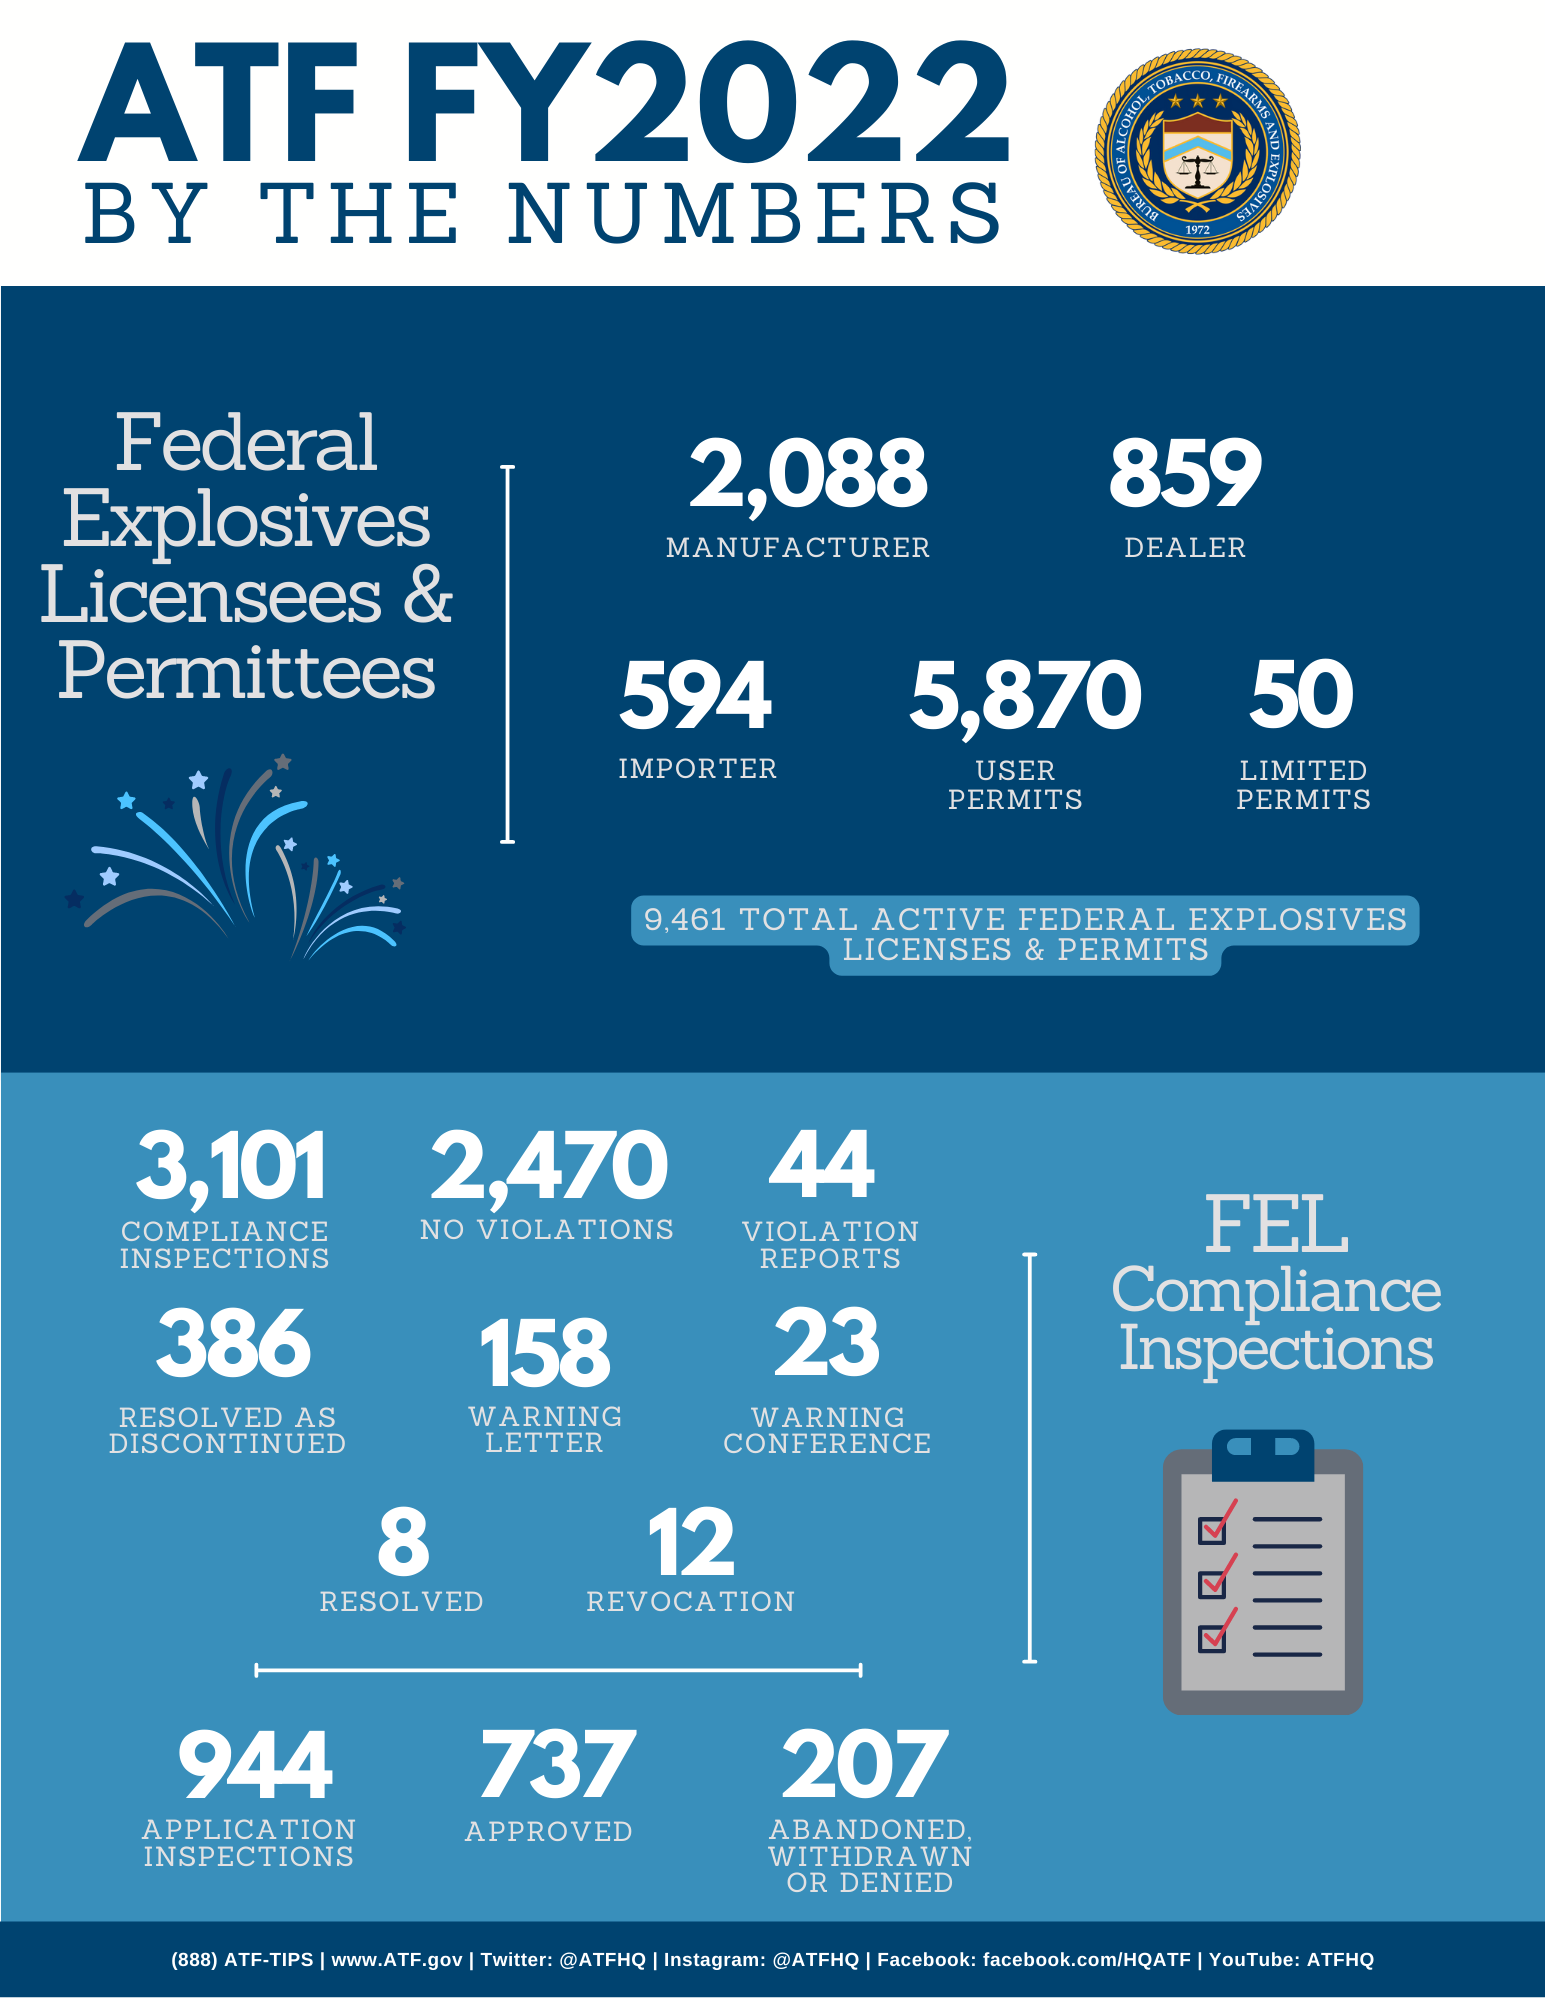 FY 2022 By The Numbers - FEL Infographic